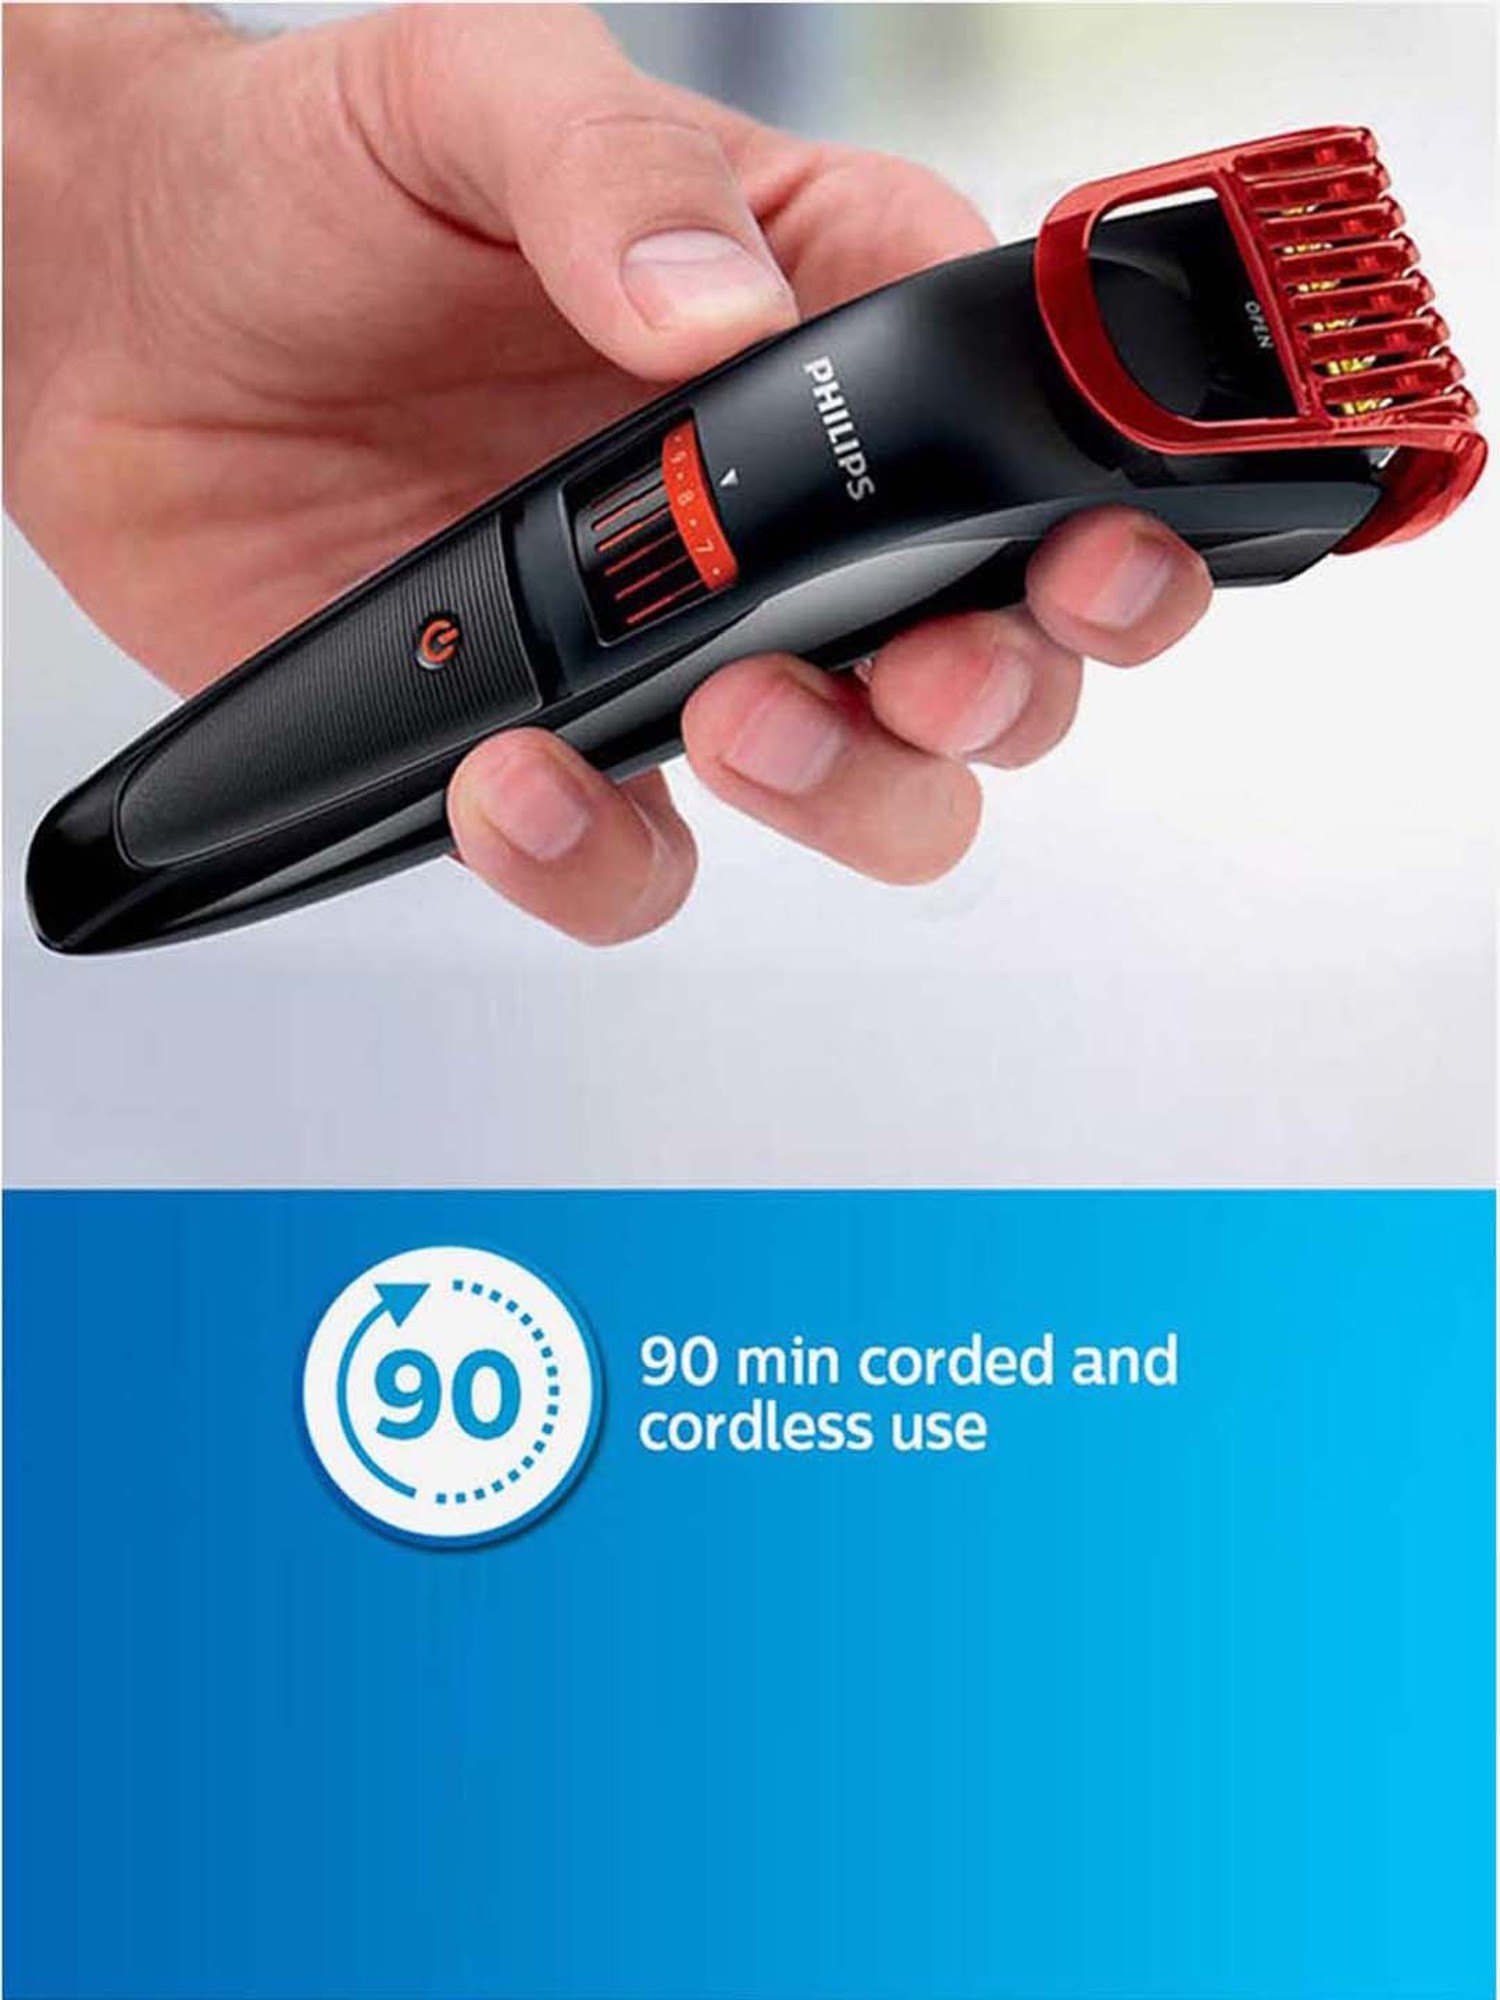 philips trimmer quick charge